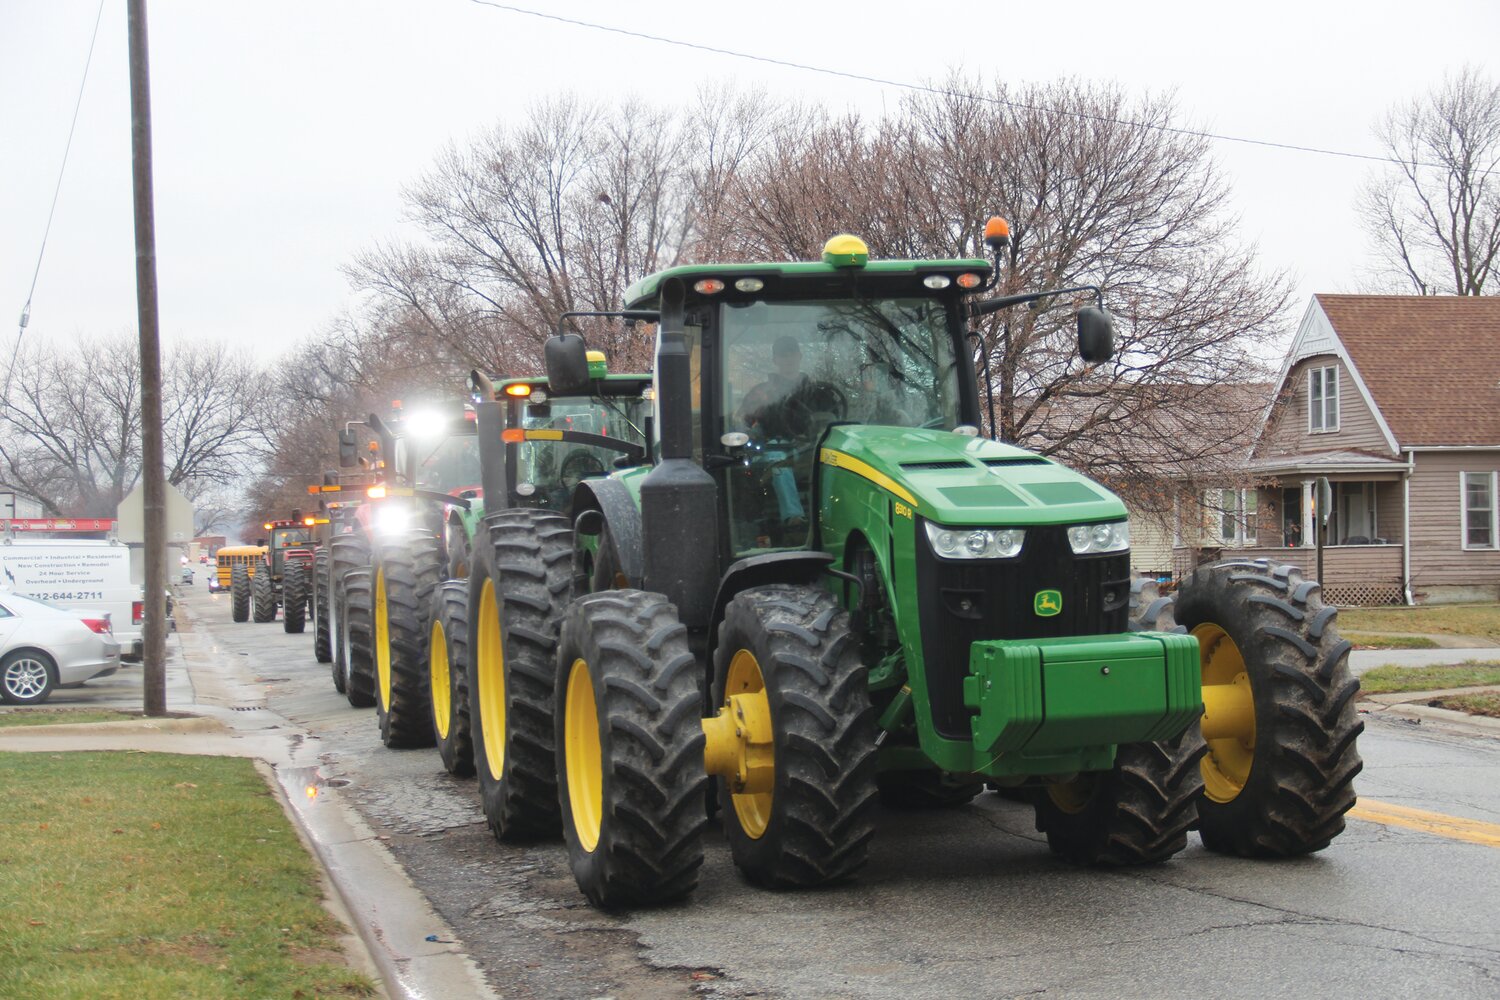 A line of tractors could be seen on Iowa Ave. last Friday as Boyer Valley held its annual 